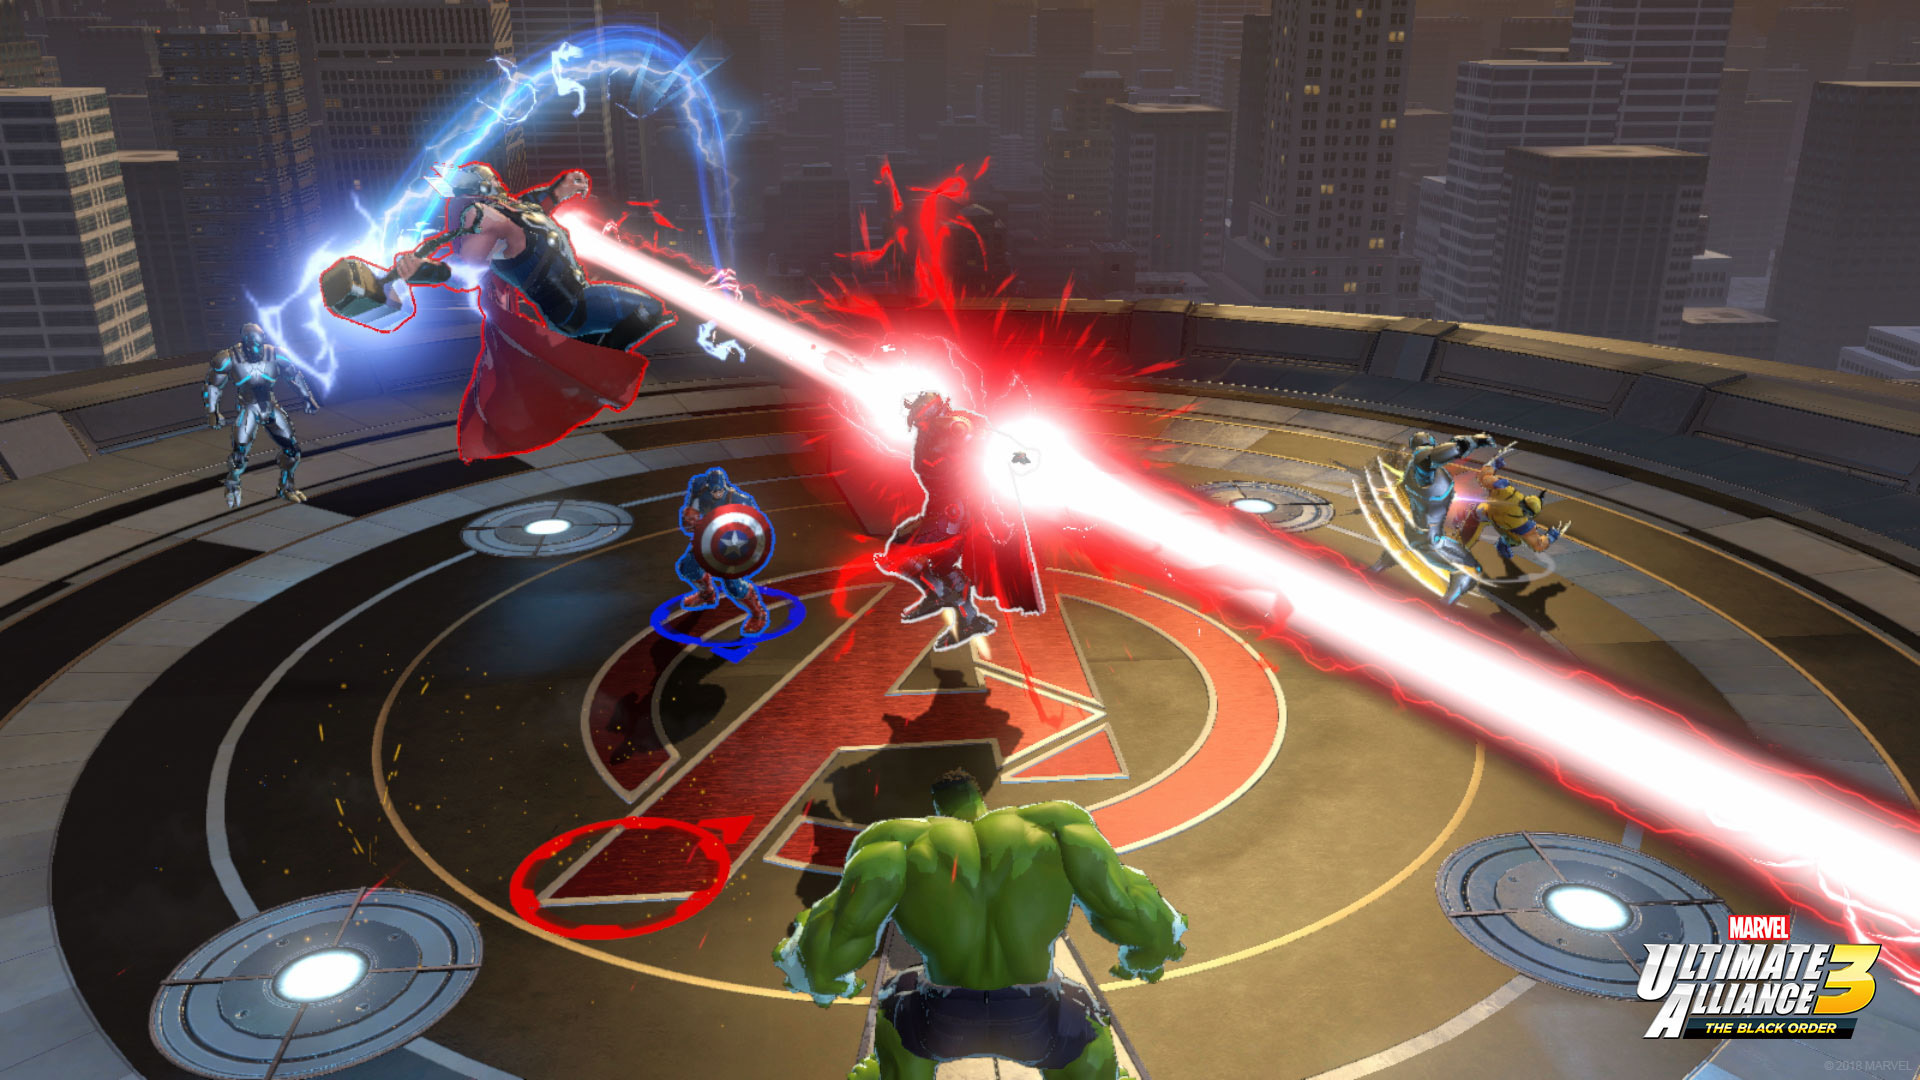 Action, Koei Tecmo Games, Marvel Ultimate Alliance 3: The Black Order, Marvel Ultimate Alliance 3: The Black Order Review, Nintendo, Nintendo Switch Review, Rating 7/10, Role Playing Game, RPG, Switch Review, Team Ninja, Video Game, Video Game Review